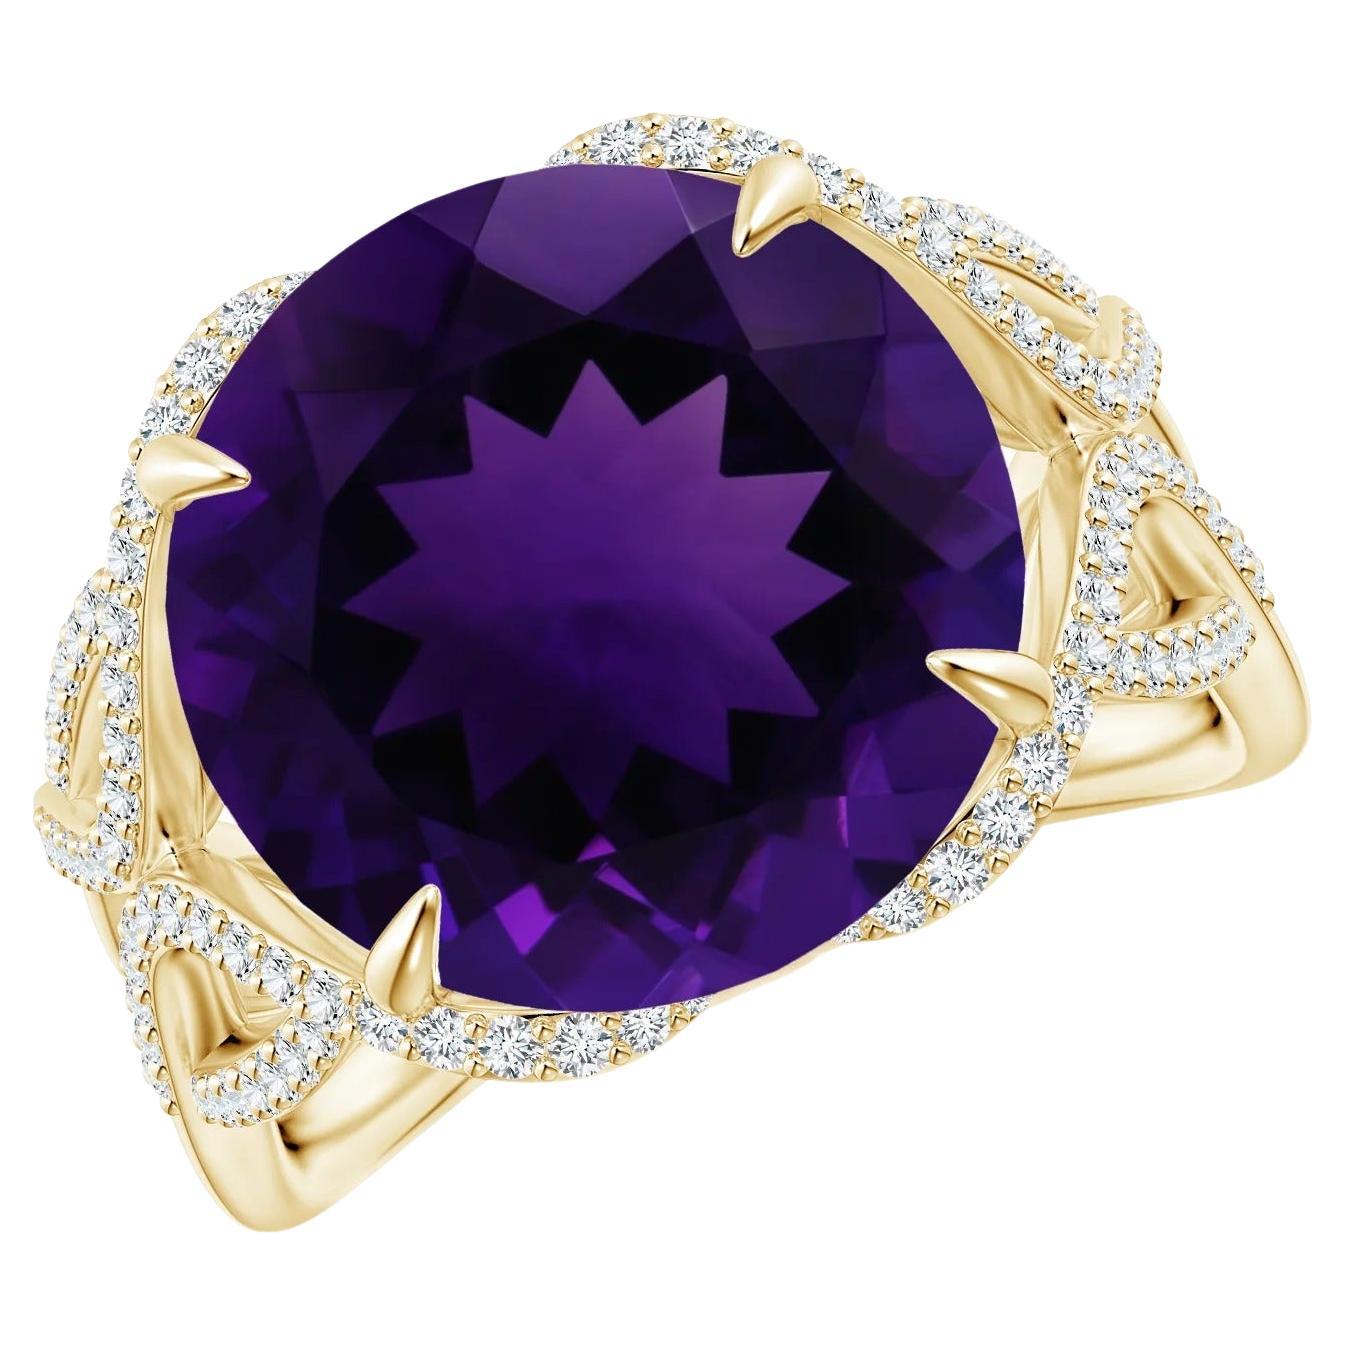 GIA Certified Natural Amethyst Entwined Shank Ring in Yellow Gold